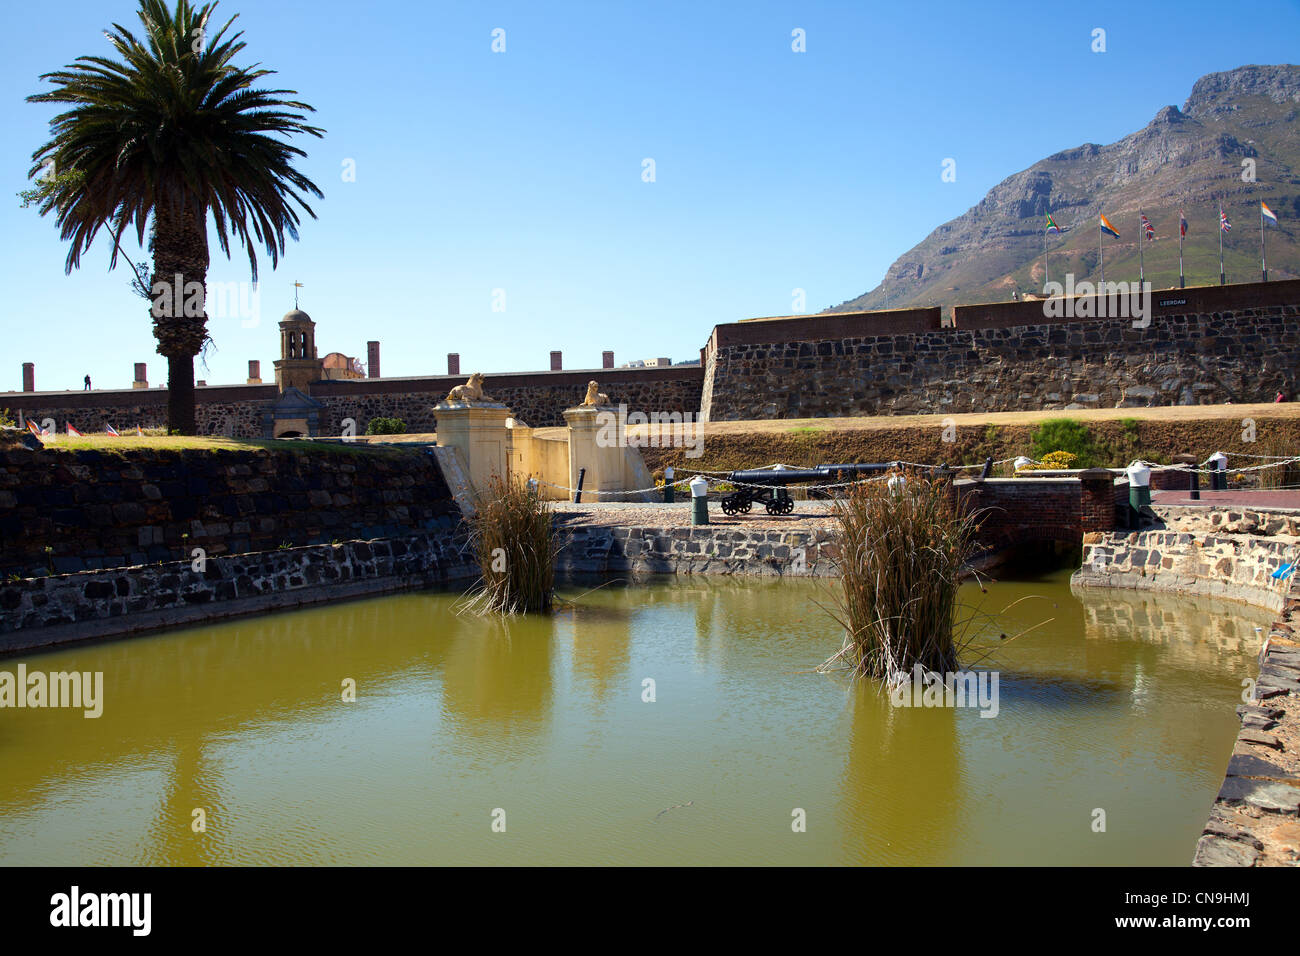 Castle of Good Hope - Cape Town Stock Photo